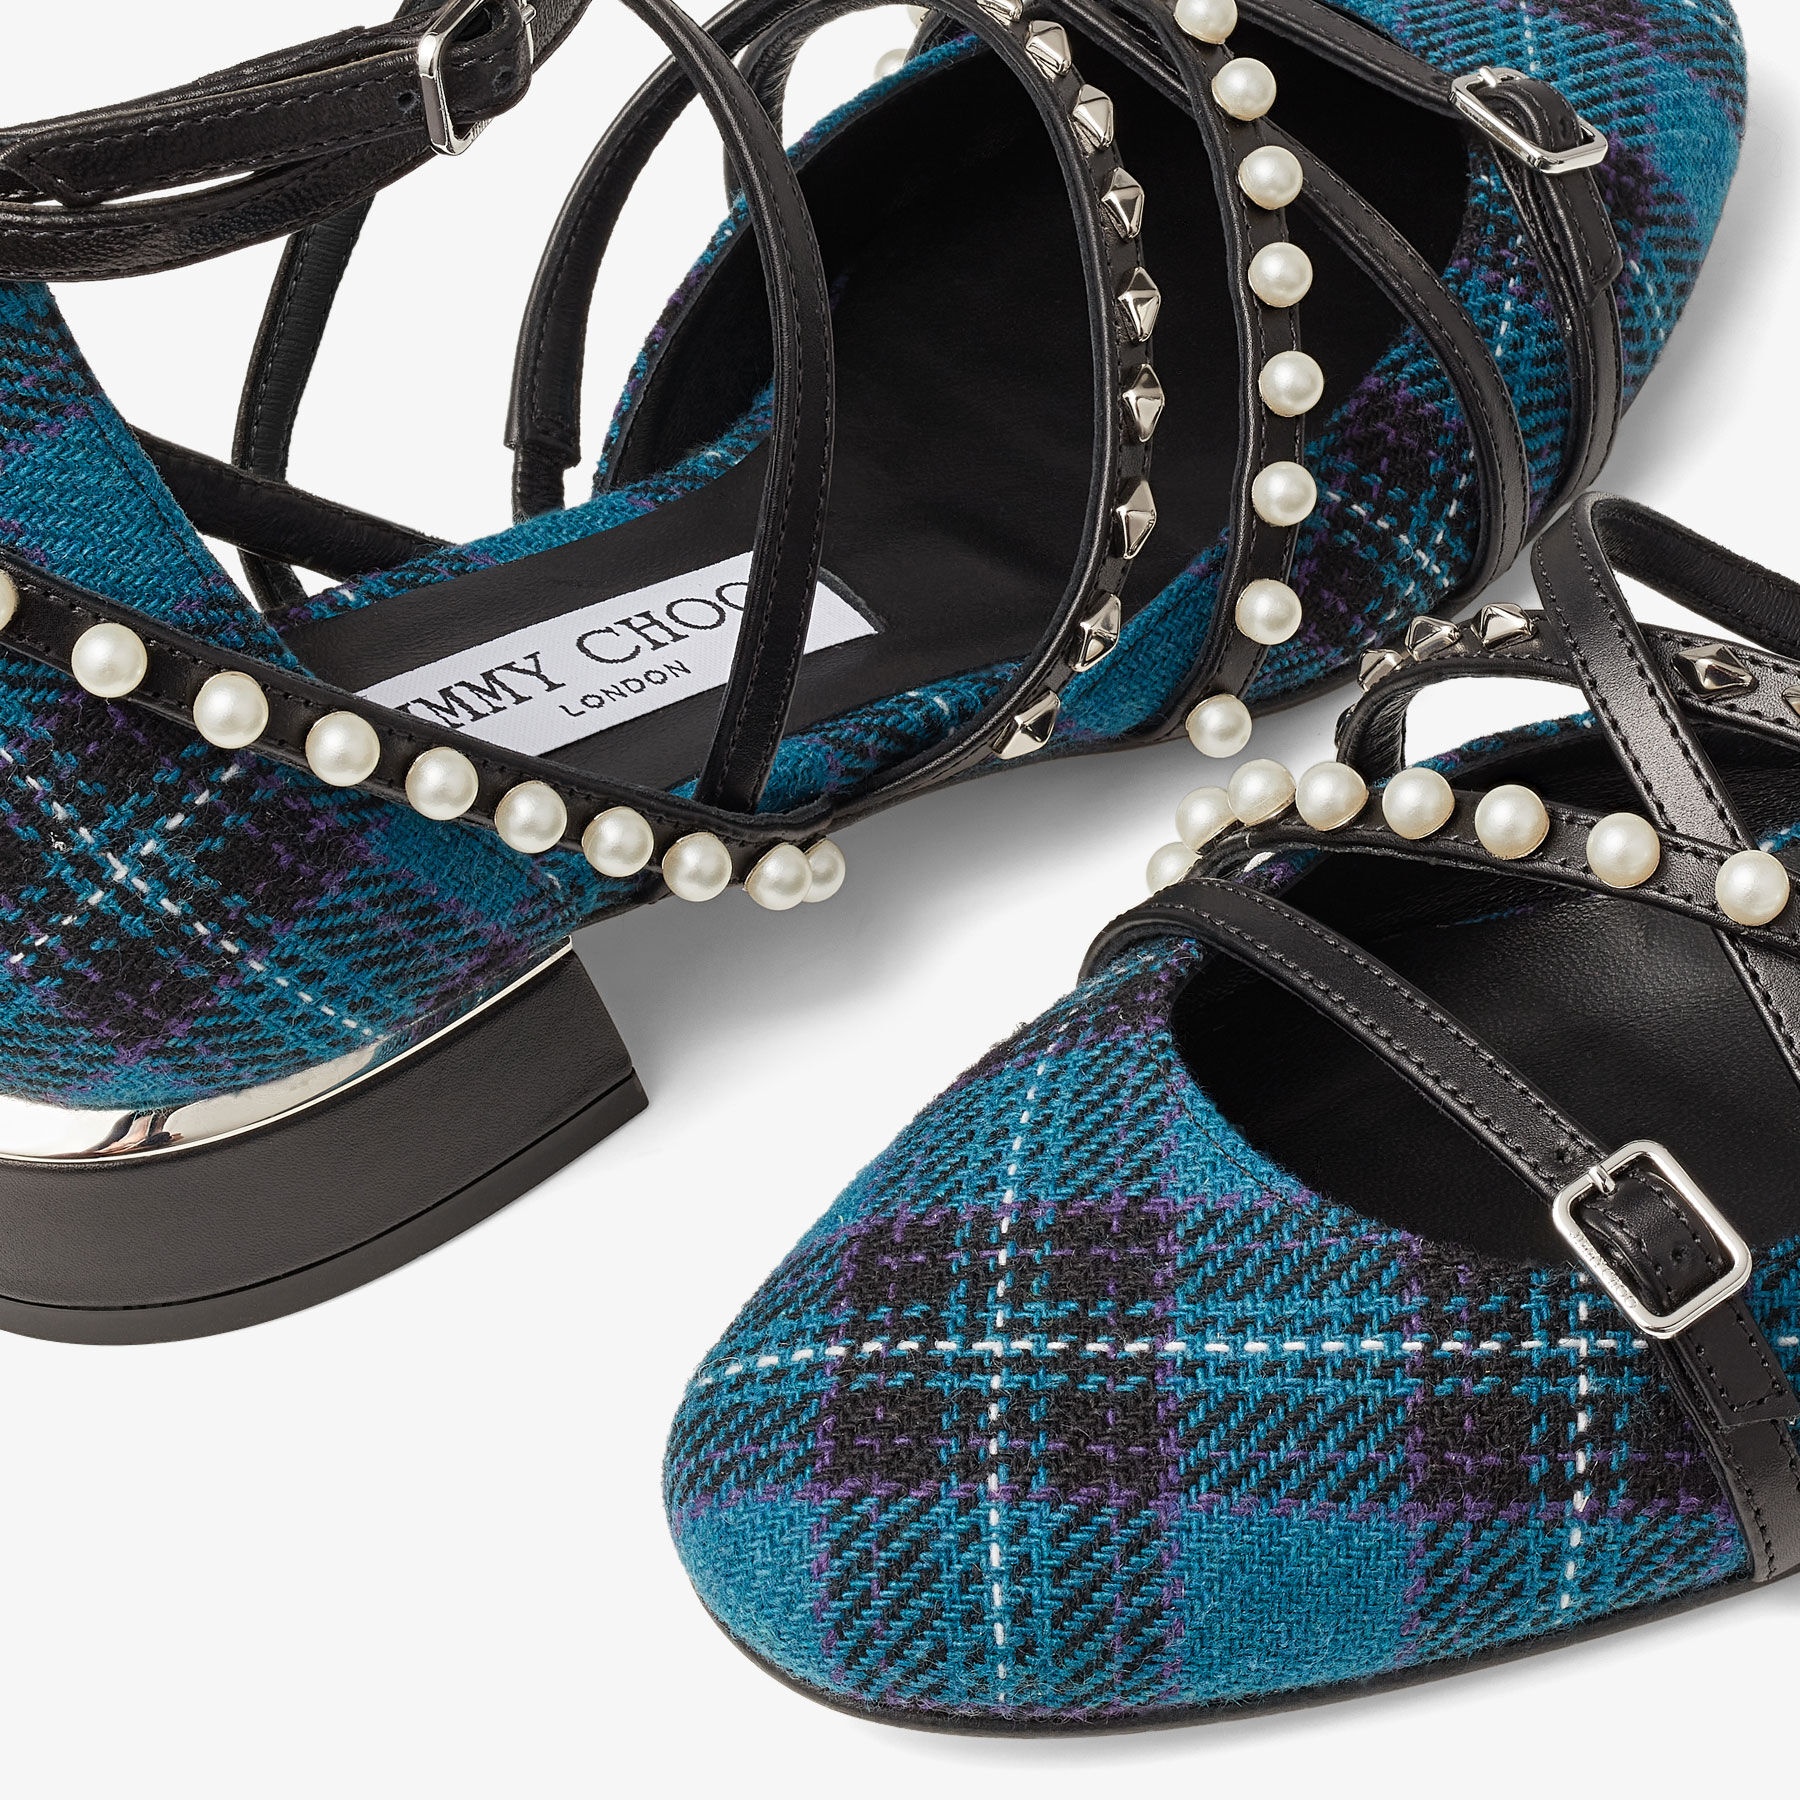 Celestia 25
Peacock Tartan Fabric Pumps with Pearls and Studs - 3